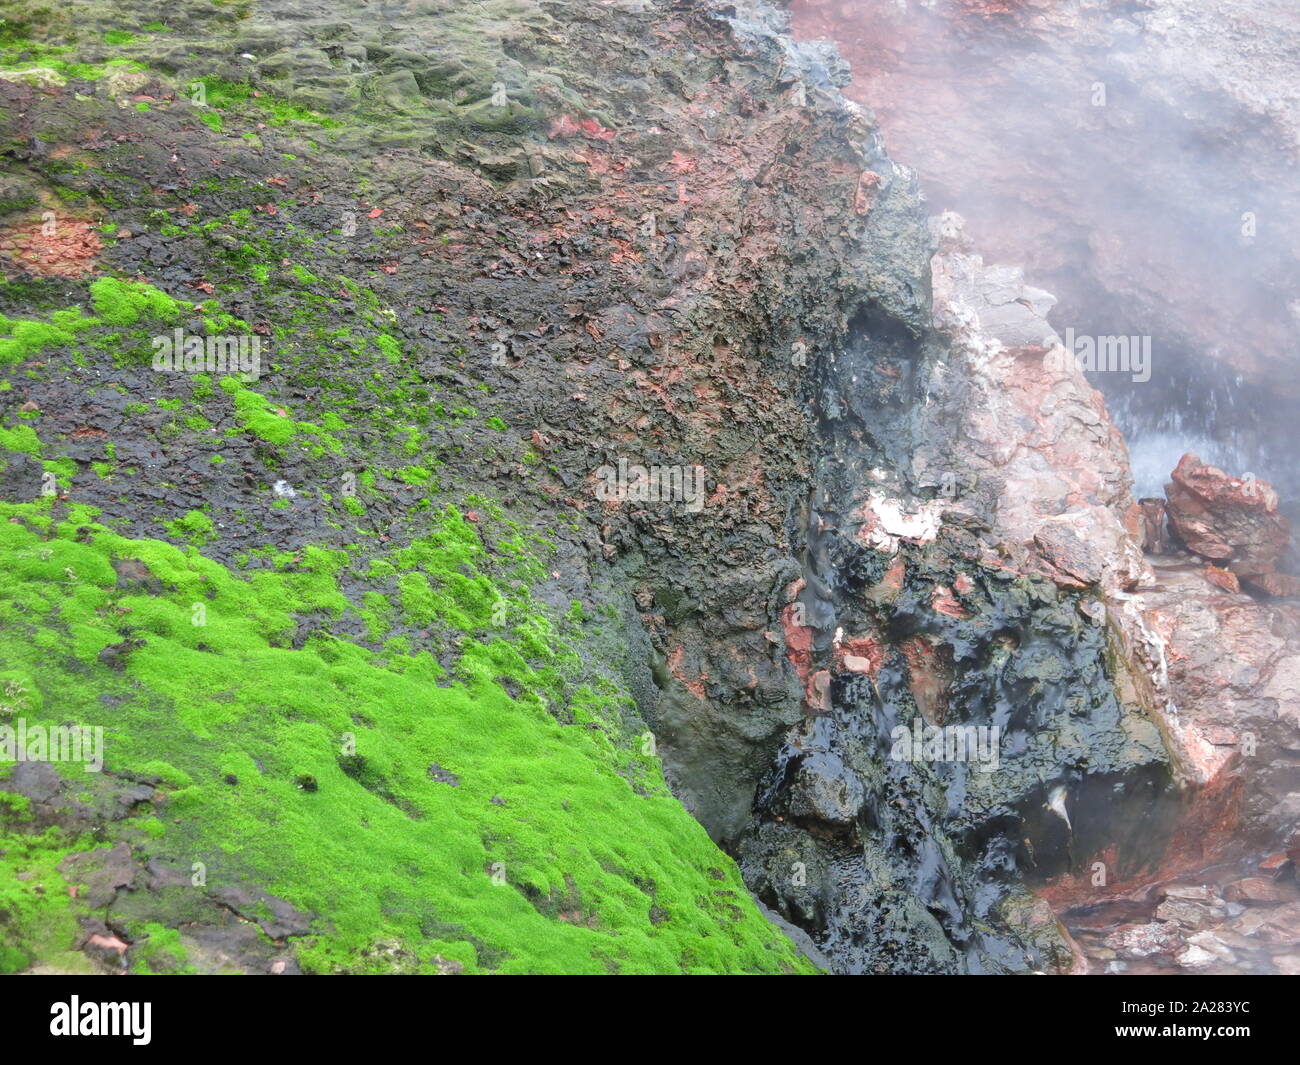 The geothermal hot springs and volcanic rock make ideal conditions for deep green moss to grow; Deildartunguhver, West Iceland Stock Photo